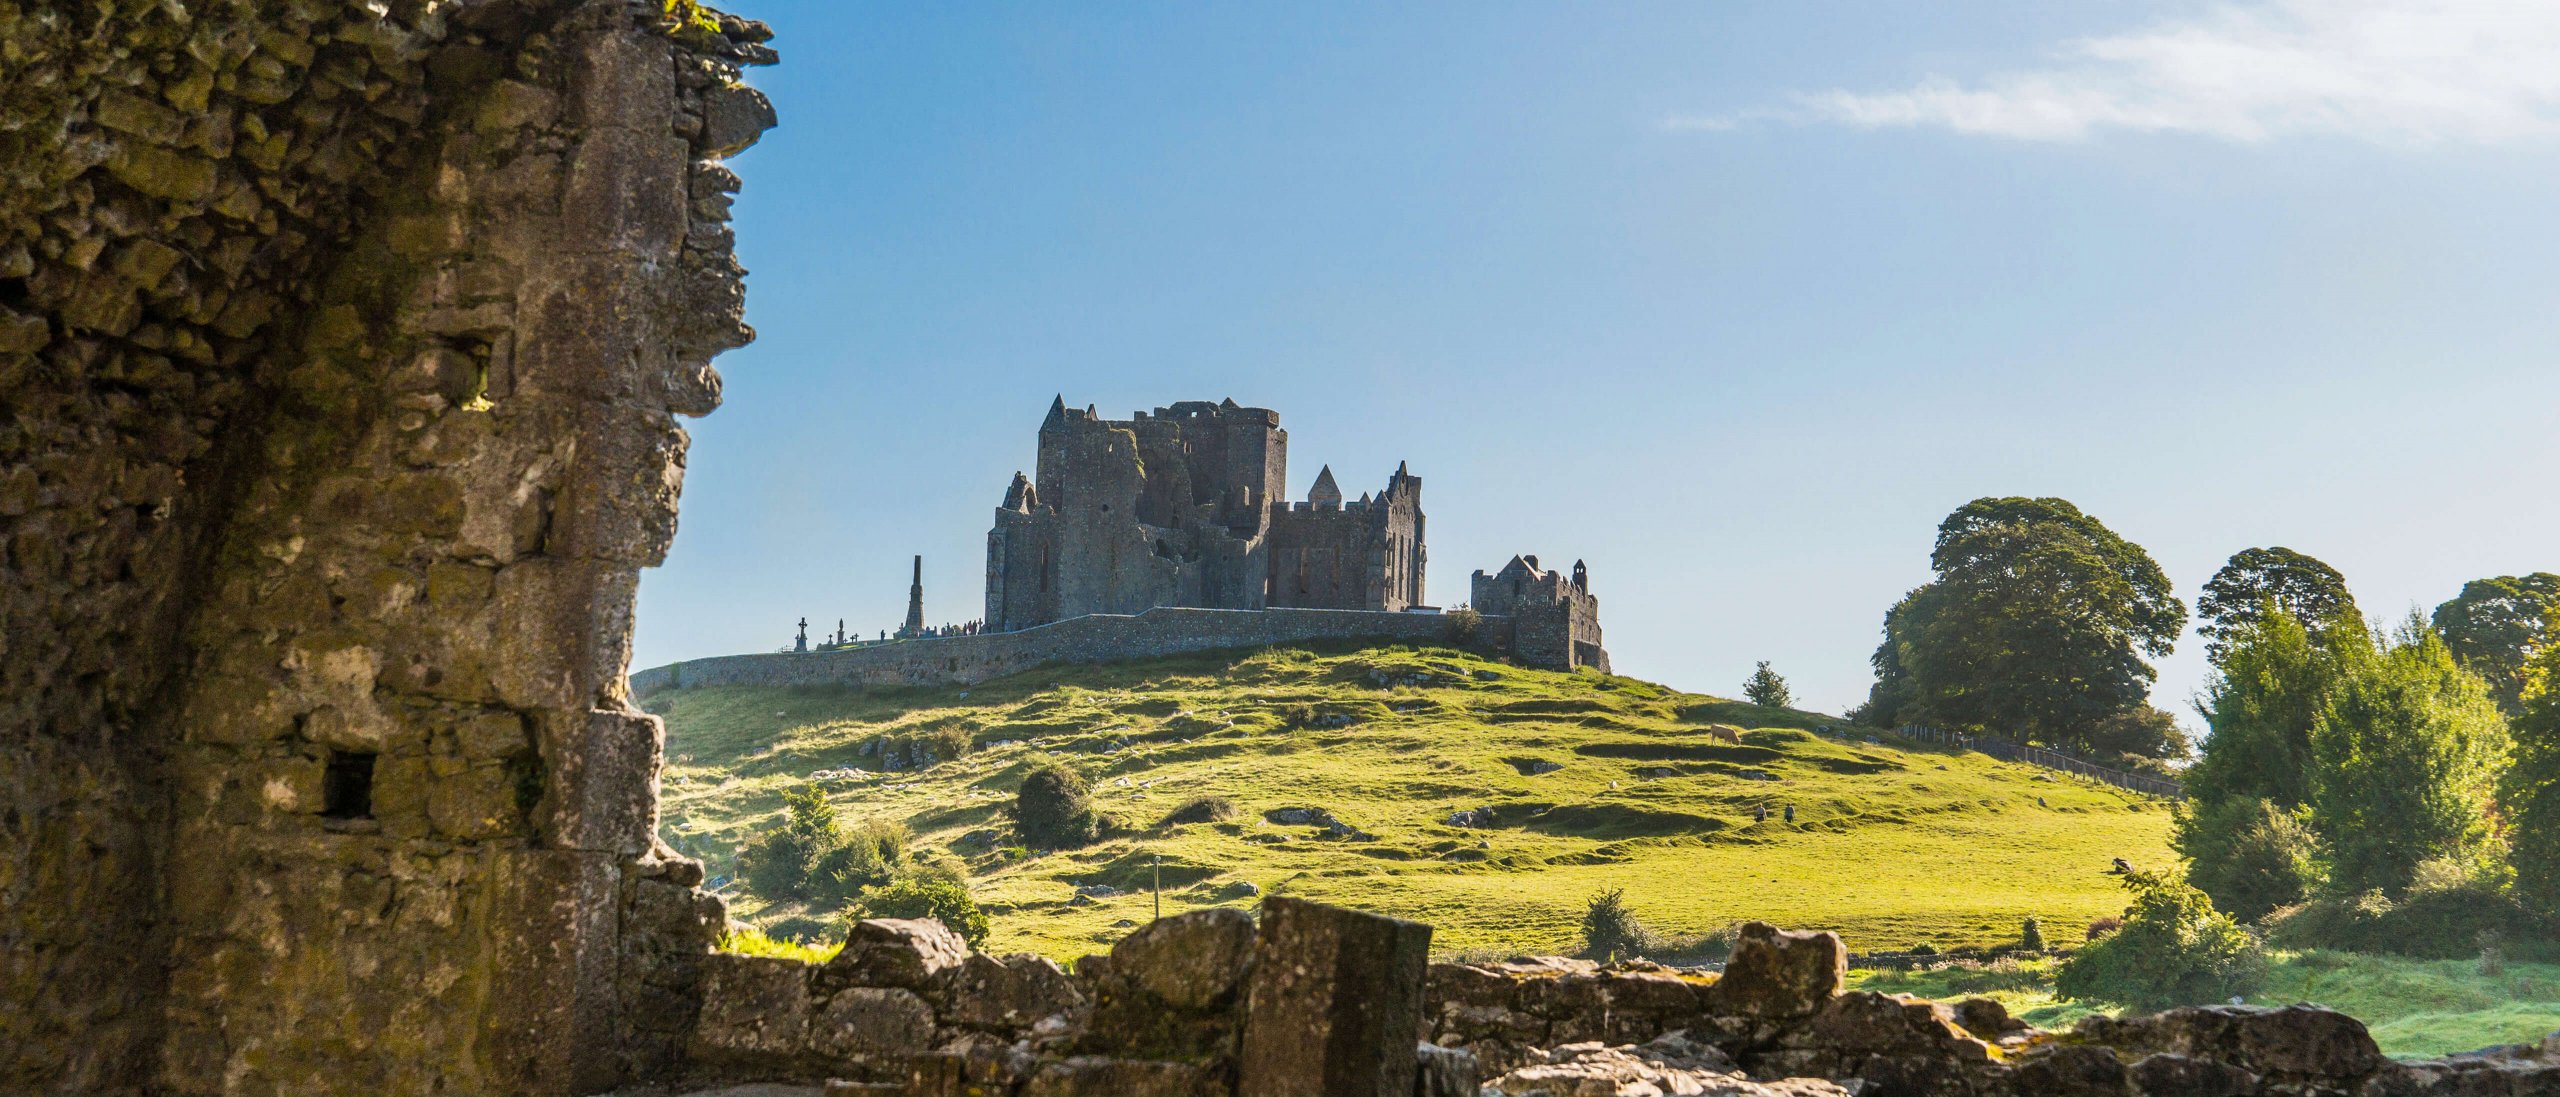 The Rock of Cashel pictured from a distance